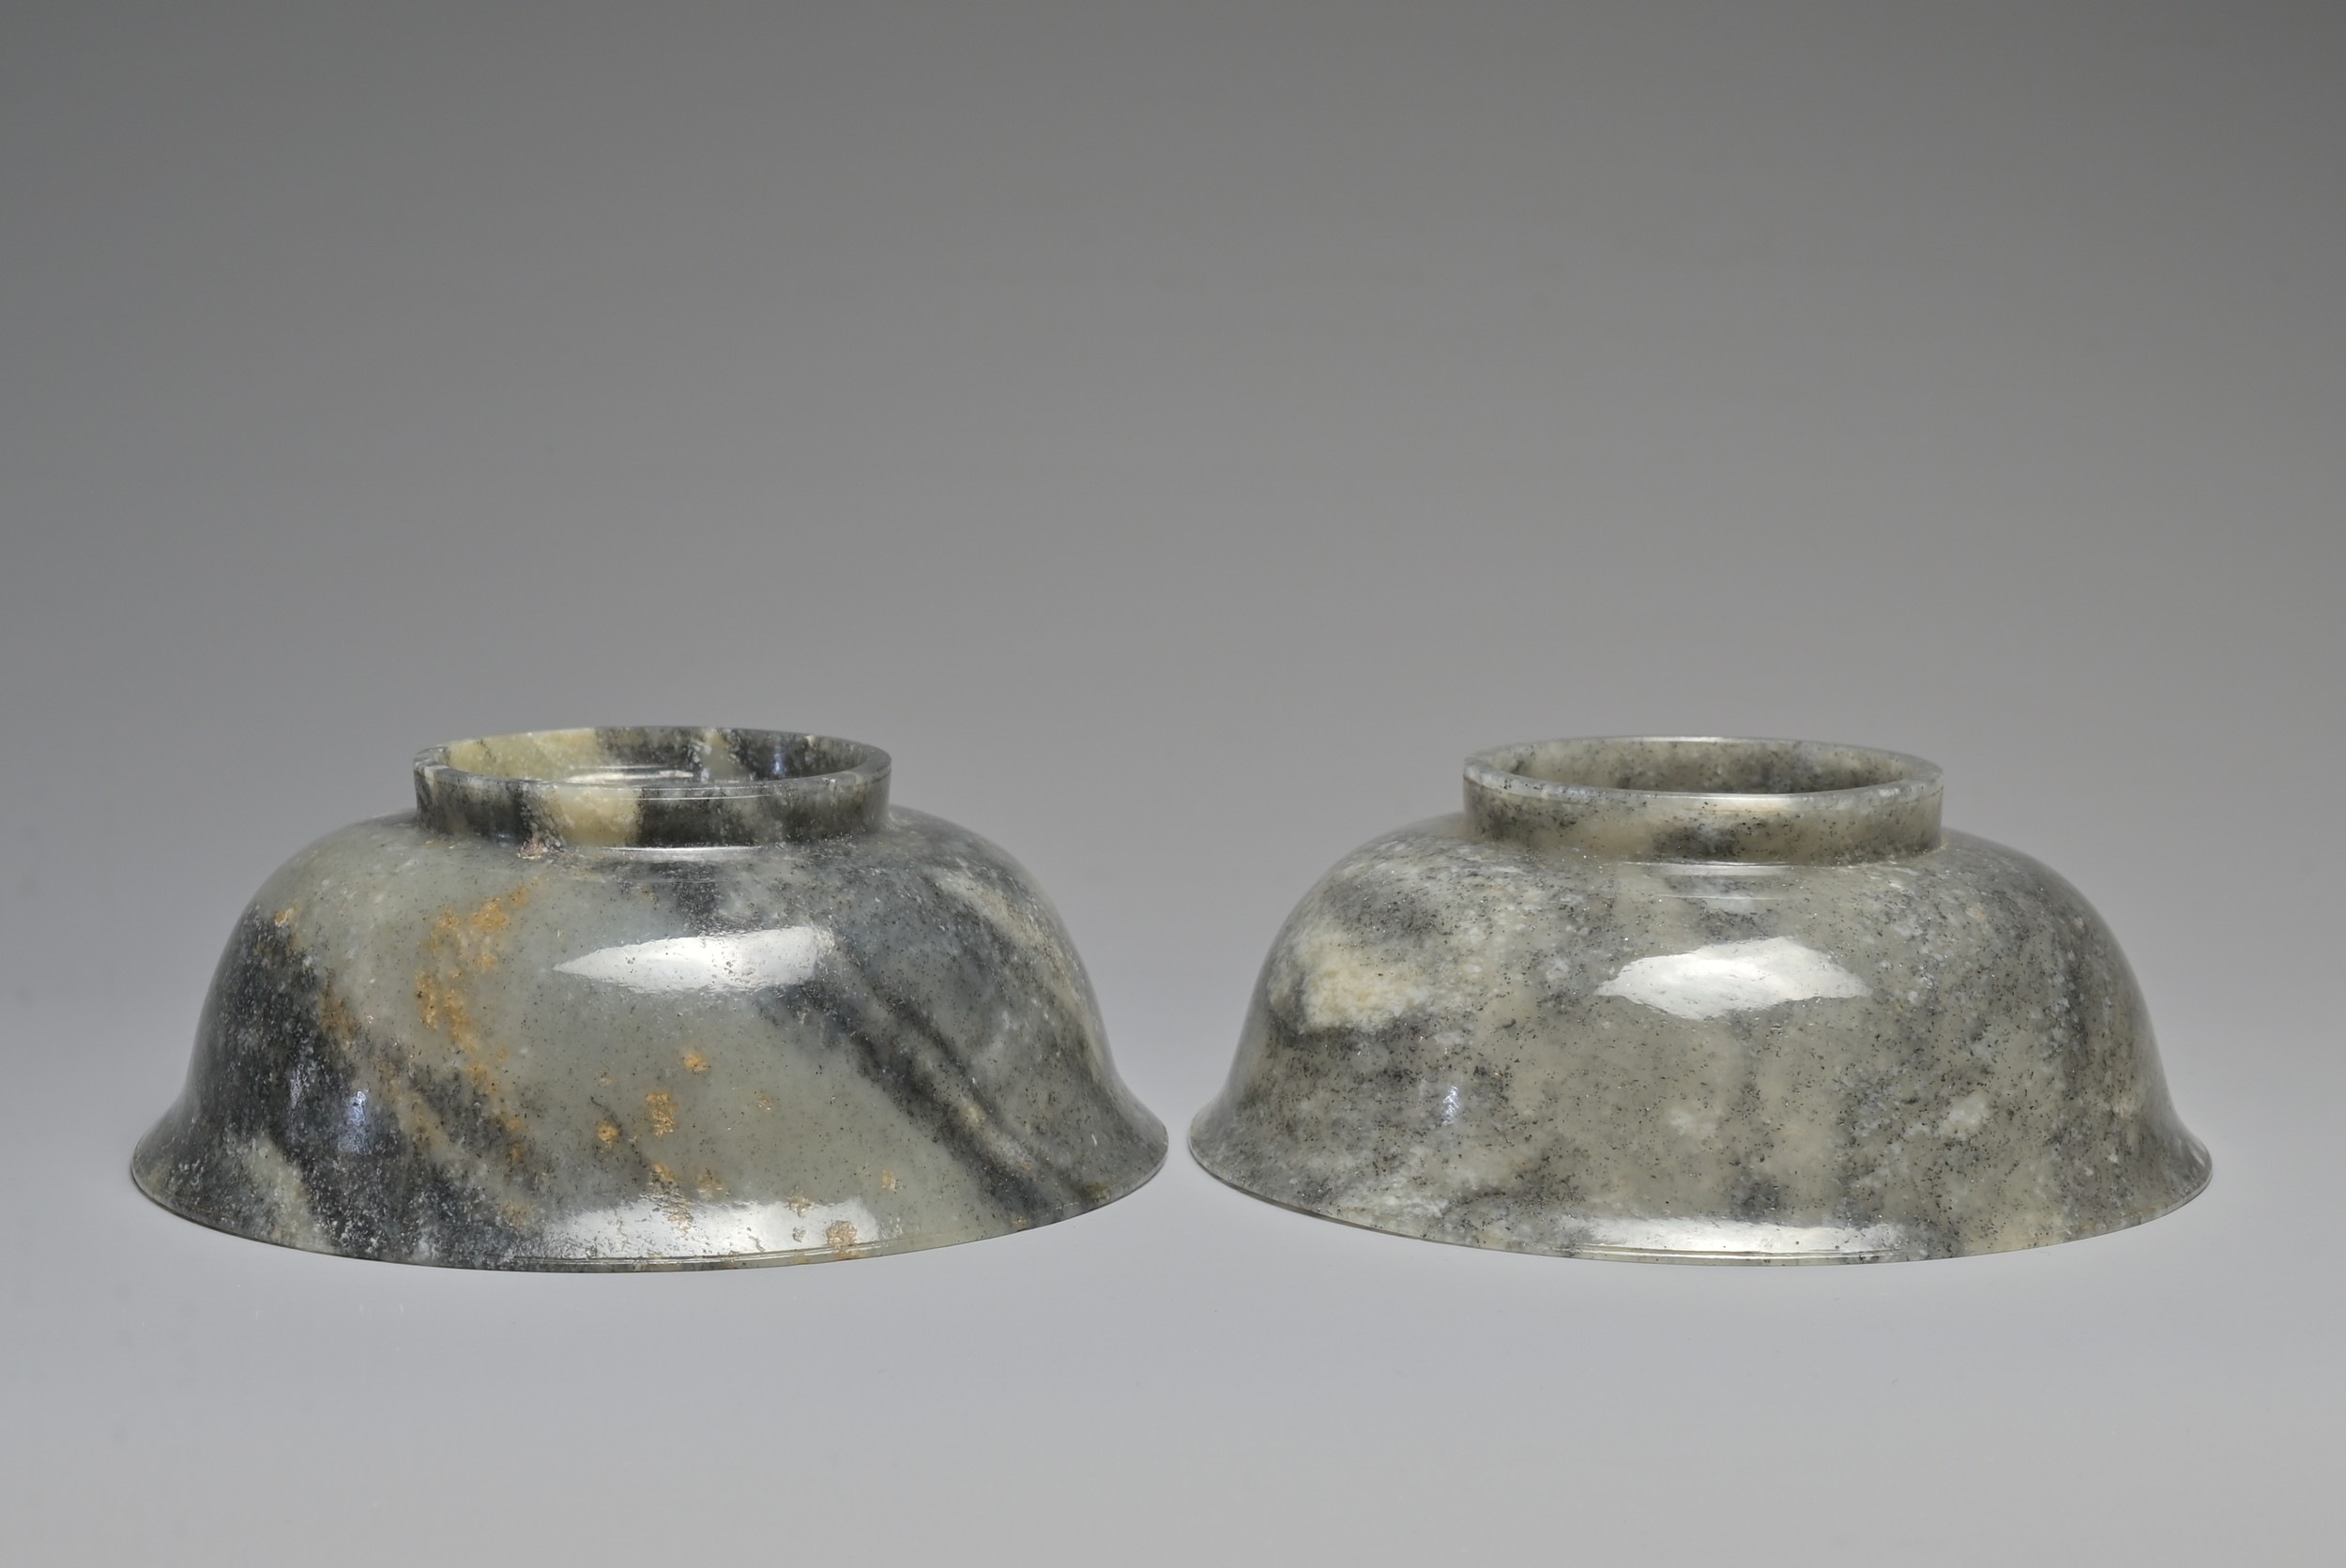 A FINE AND RARE PAIR OF CHINESE BLACK AND WHITE STRIATED NEPHRITE JADE BOWLS, 18/19TH CENTURY. - Image 3 of 32